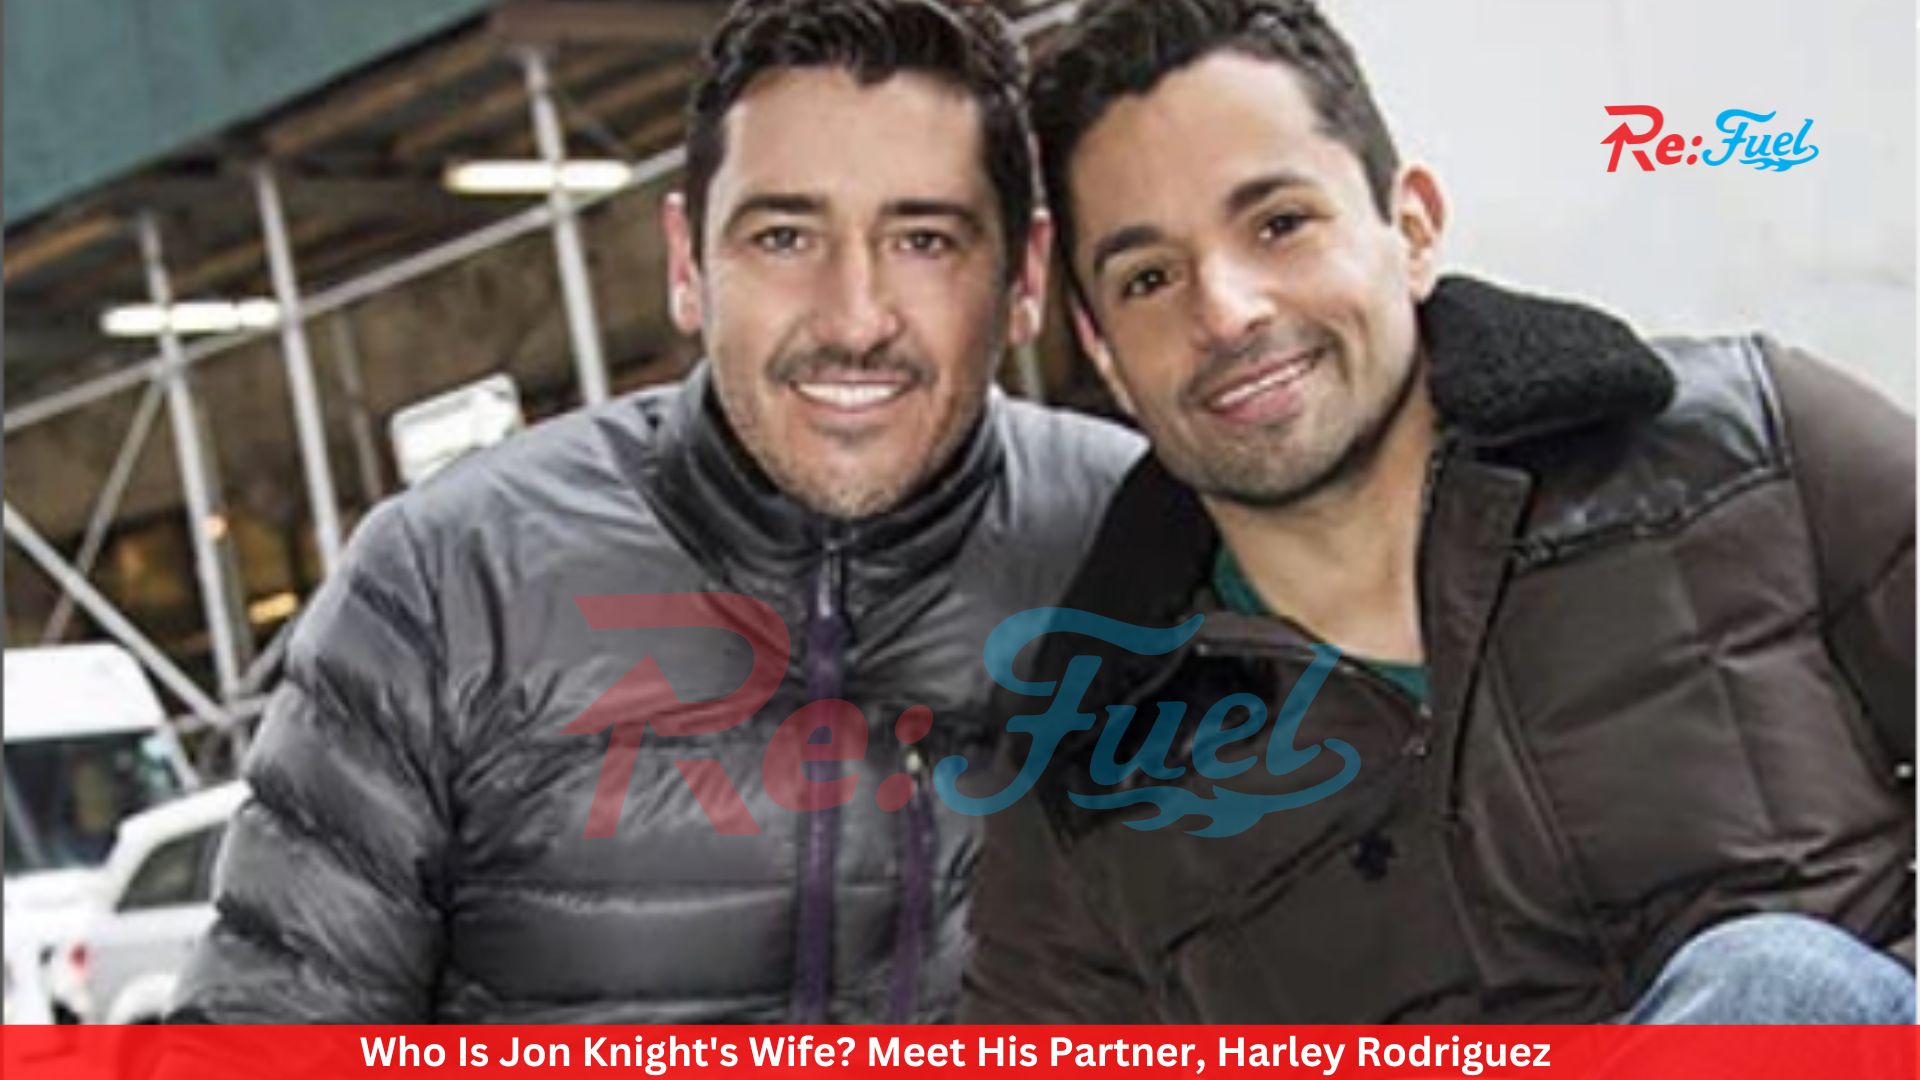 Who Is Jon Knight's Wife? Meet His Partner, Harley Rodriguez